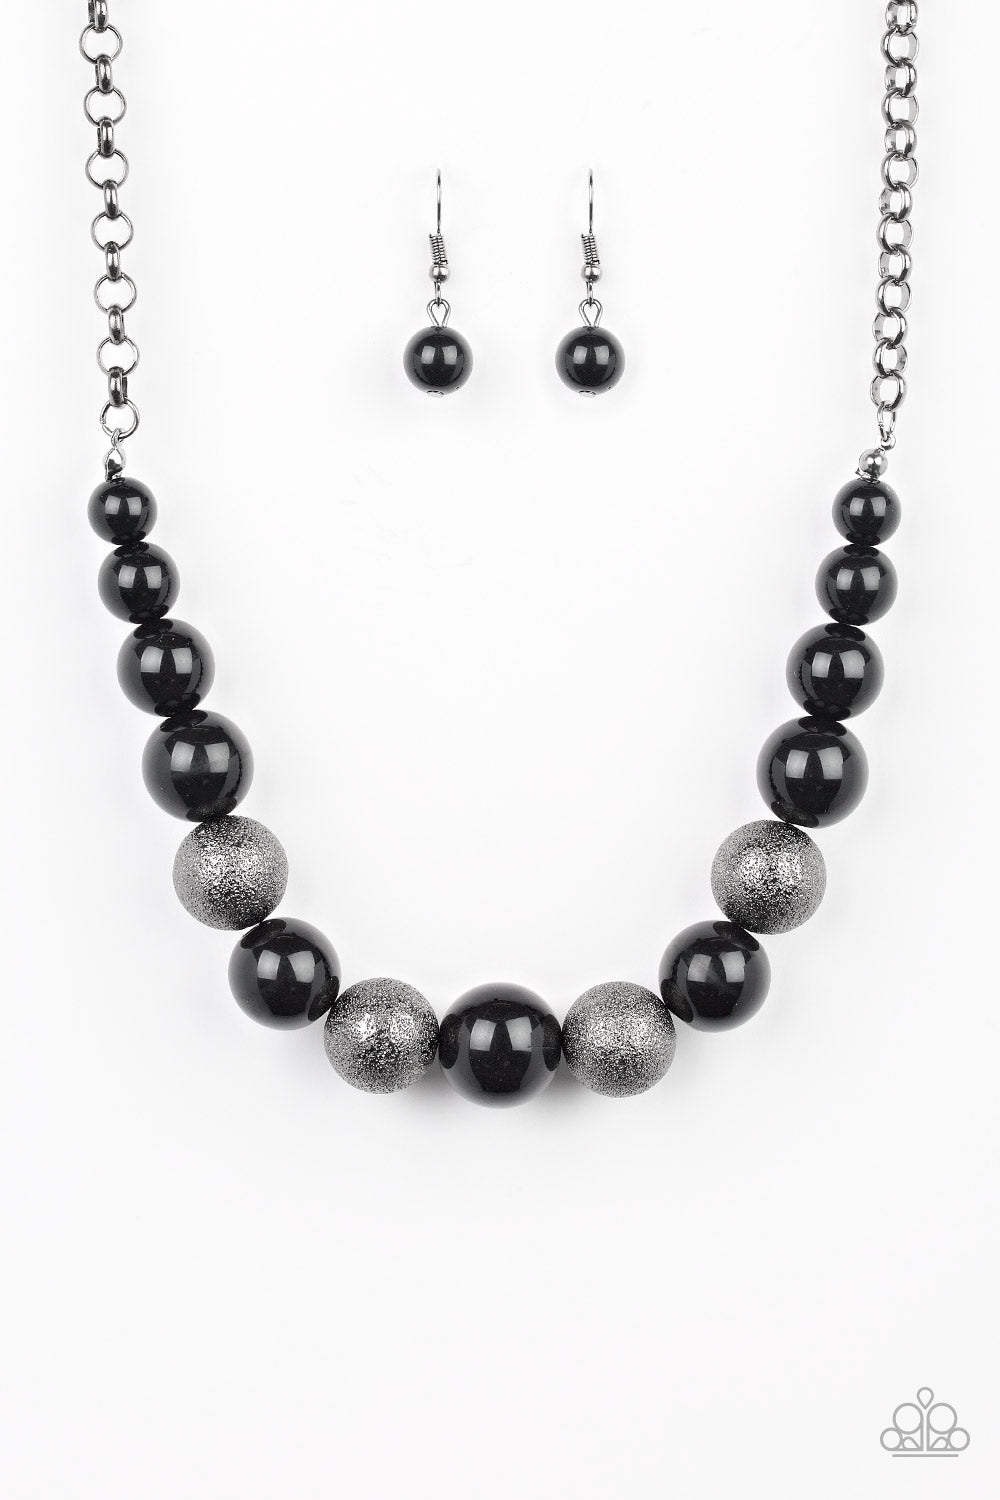 Paparazzi Color Me CEO - Black Necklace - A Finishing Touch 